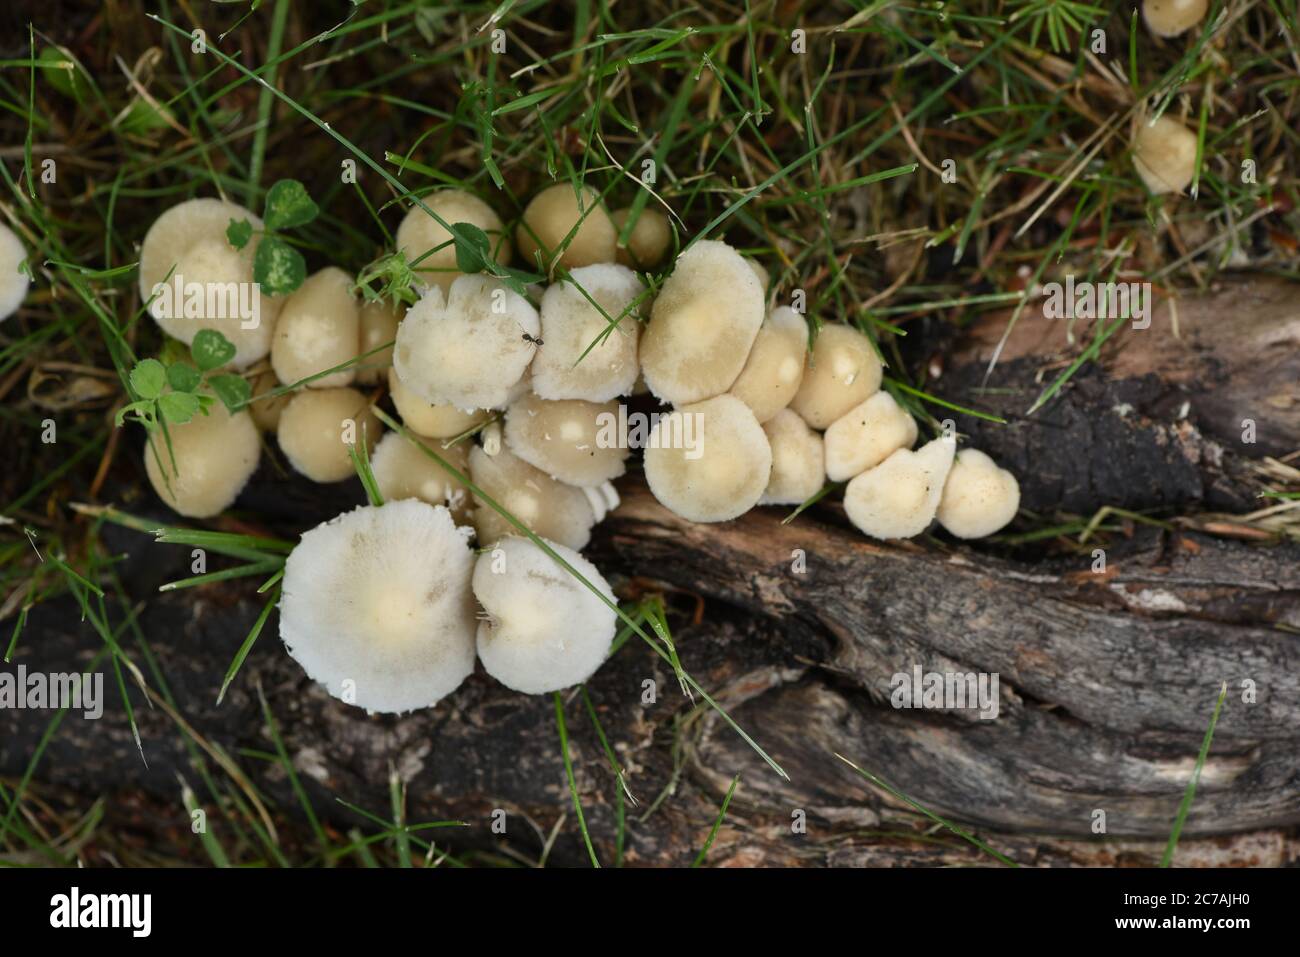 Wild mushrooms in the grass grow around a tree root on the lawn of a suburban house. Stock Photo